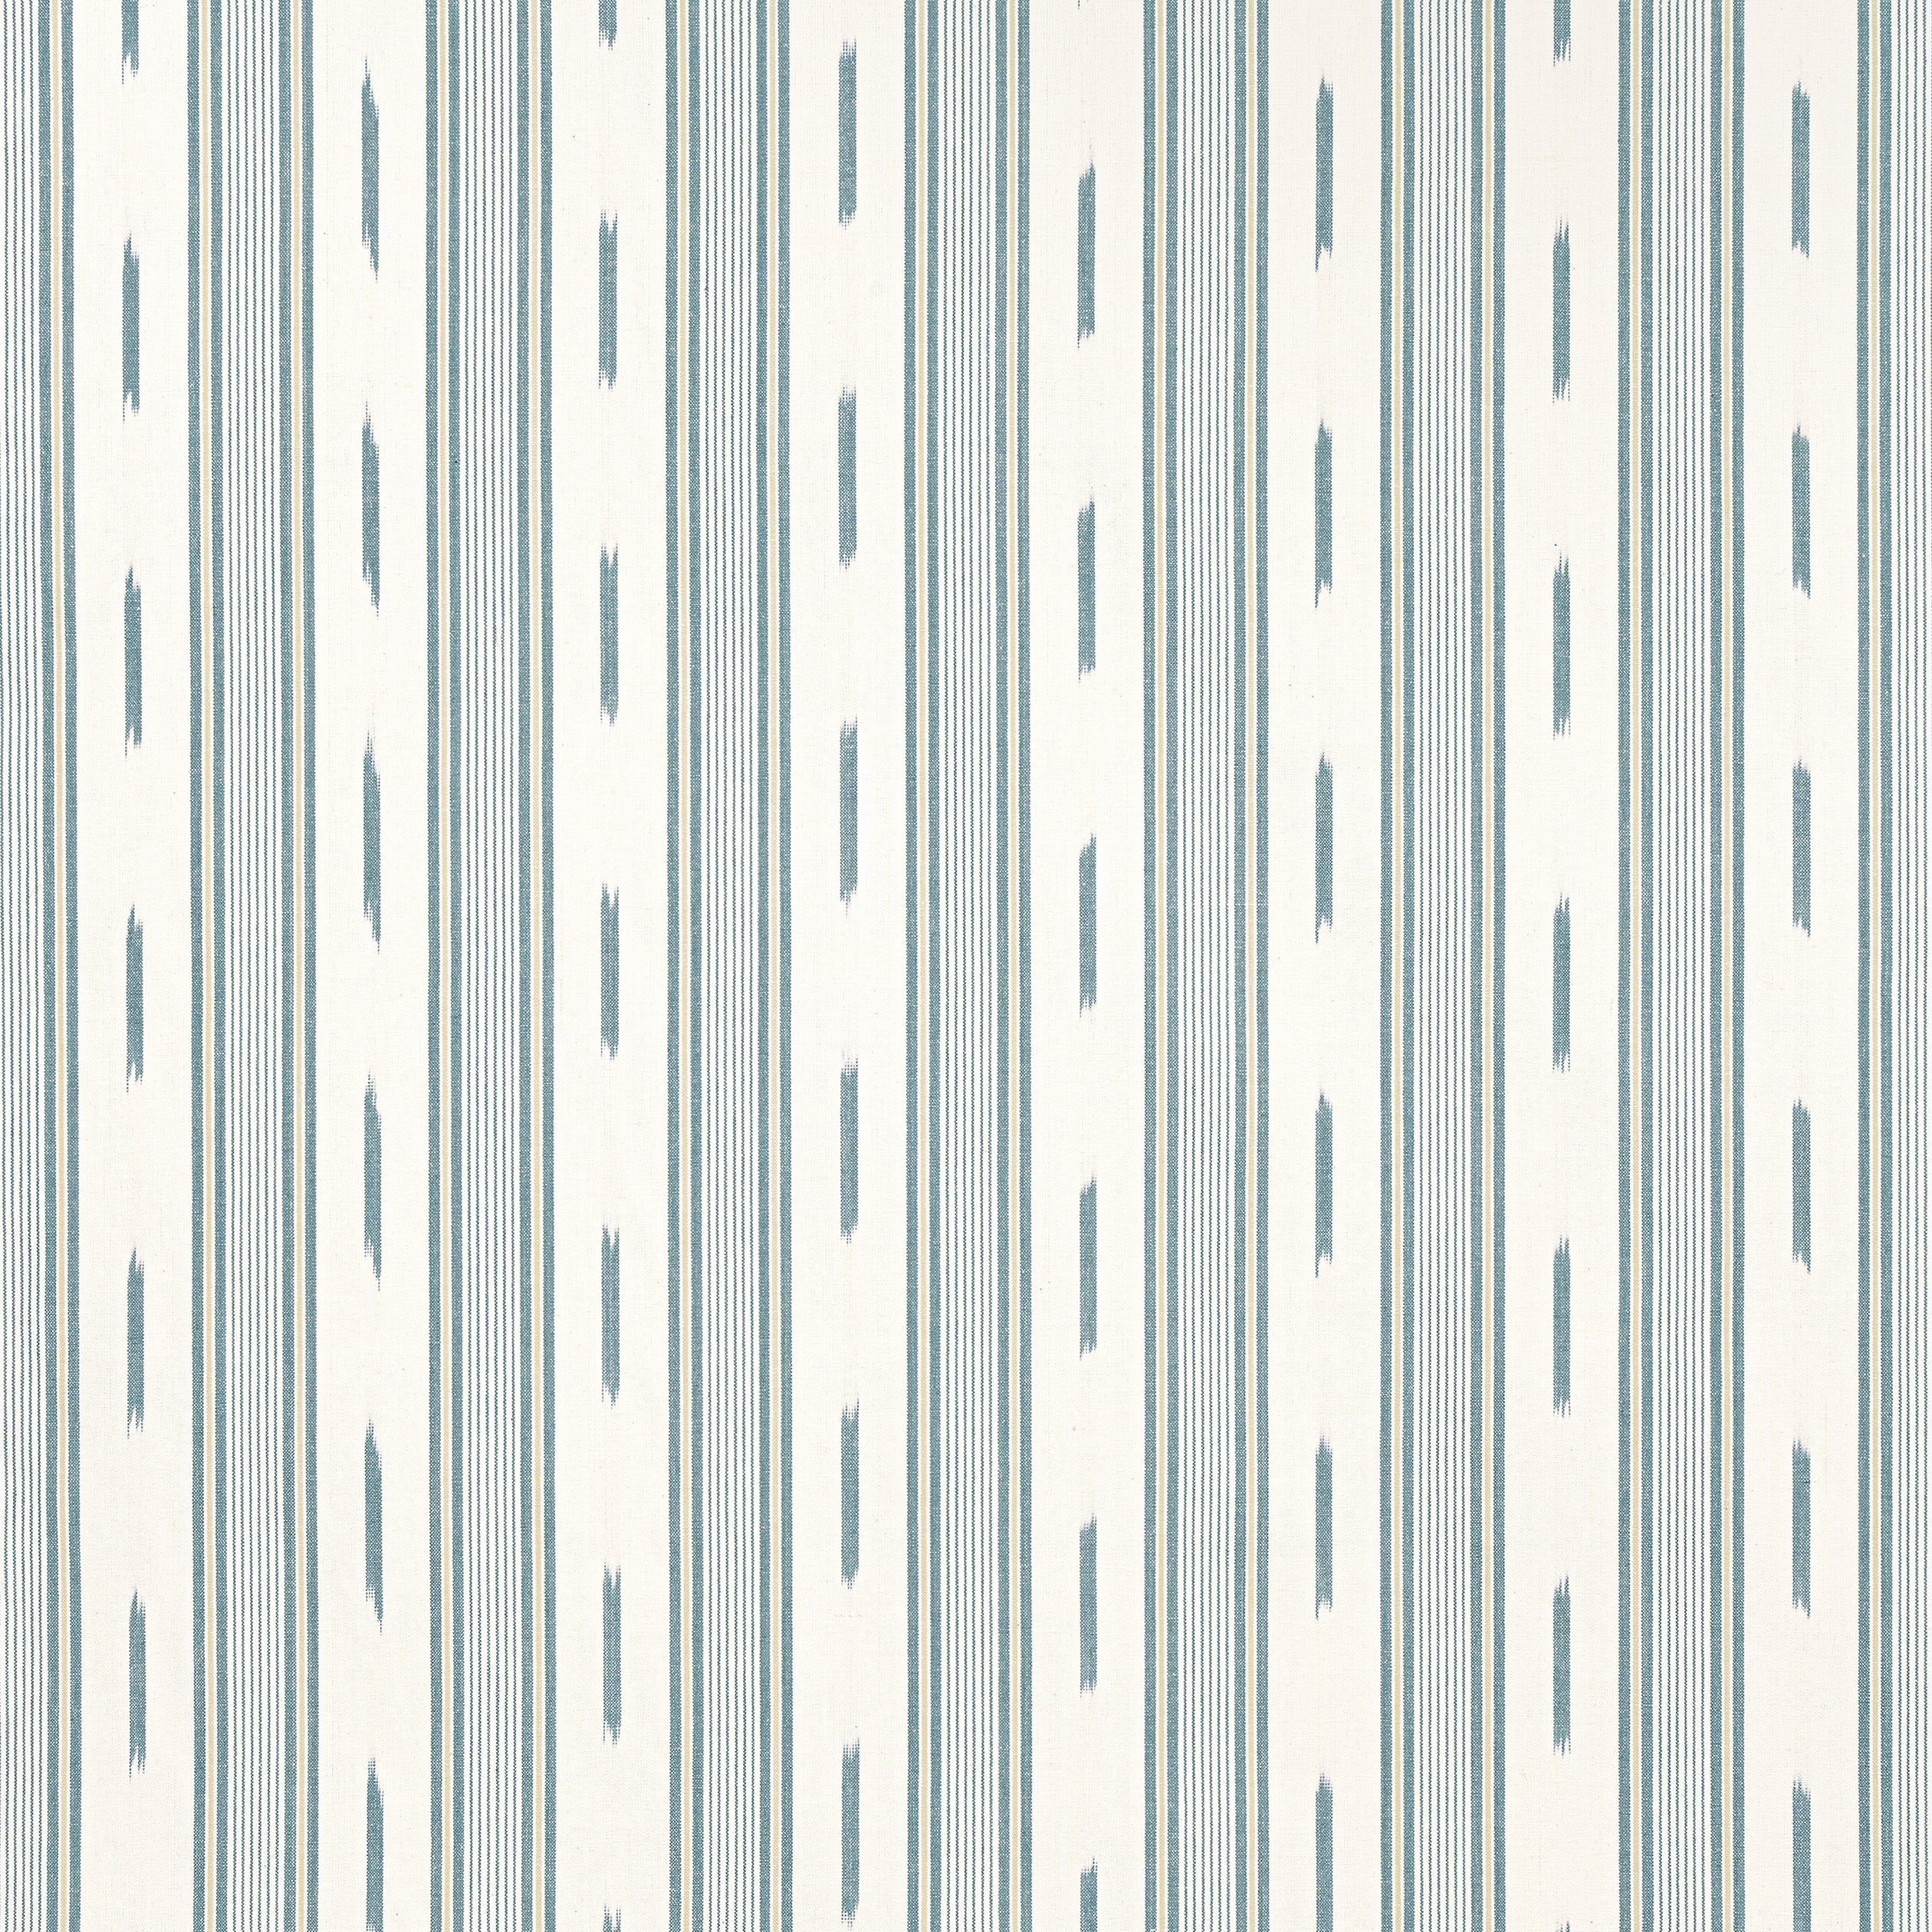 Odeshia Stripe fabric in seaglass color - pattern number W781305 - by Thibaut in the Montecito collection